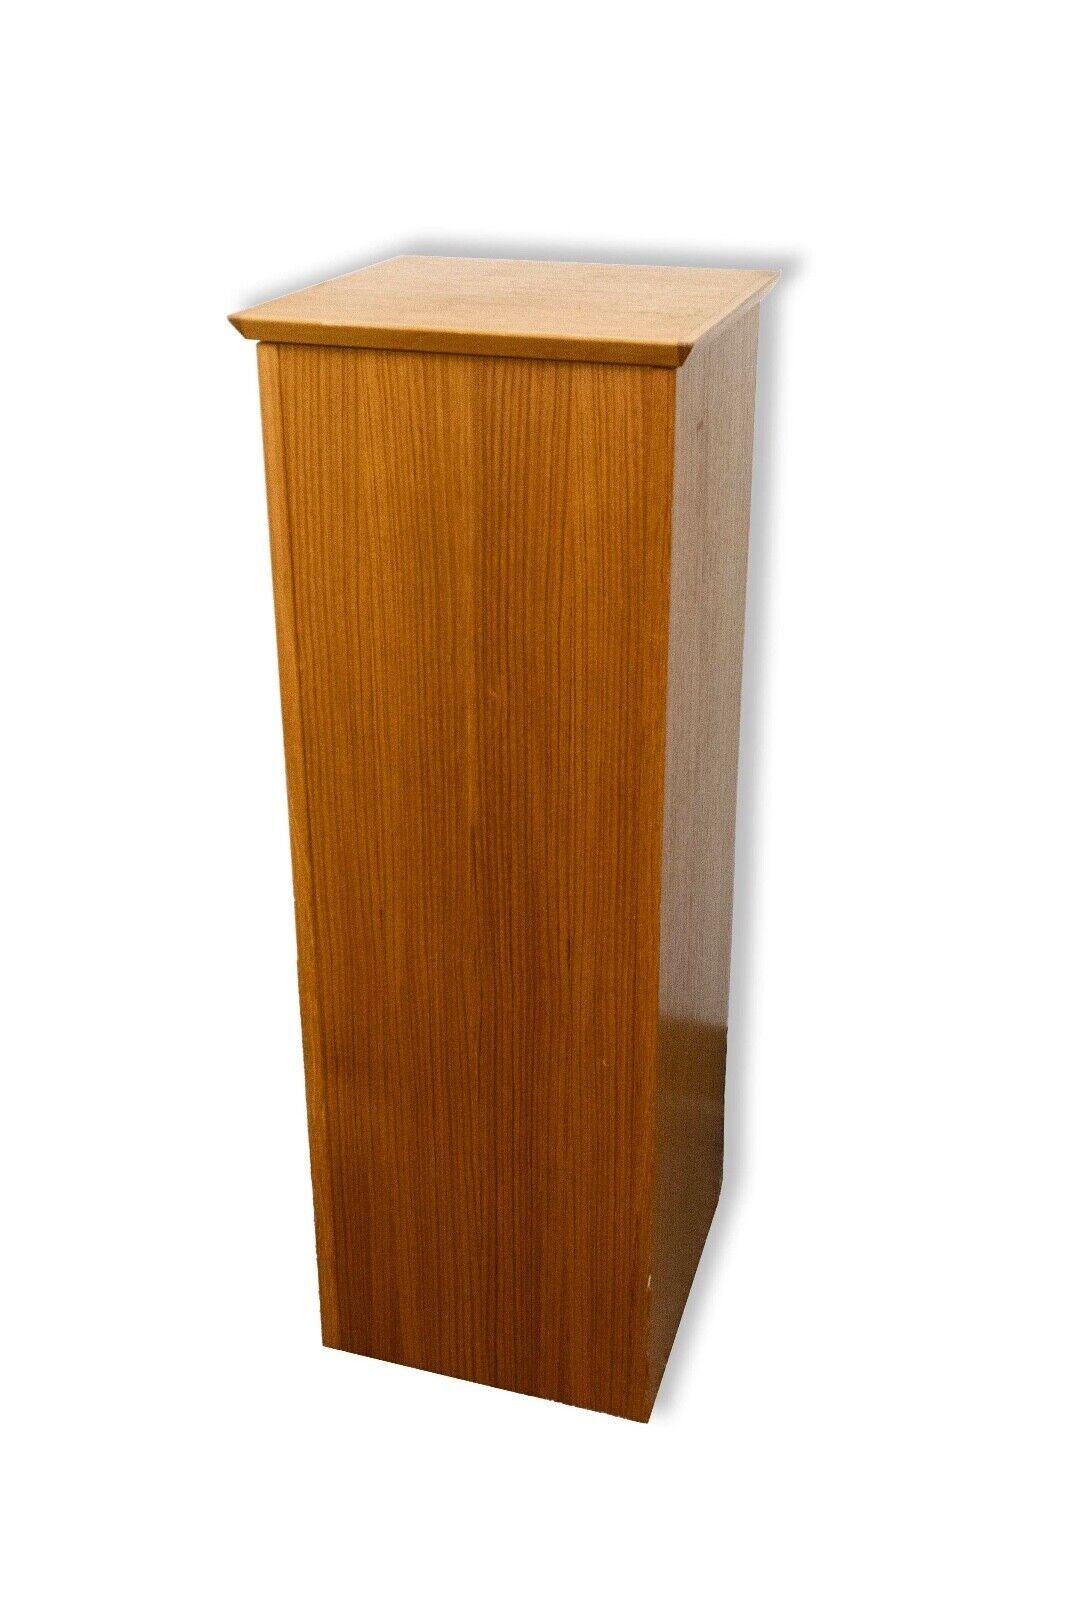 Elevate your cherished art pieces or collectibles with the Teak Display Pedestal Stand, a quintessential example of Danish Modern design. Crafted to perfection, this pedestal stand effortlessly marries functionality with aesthetic appeal. The rich,